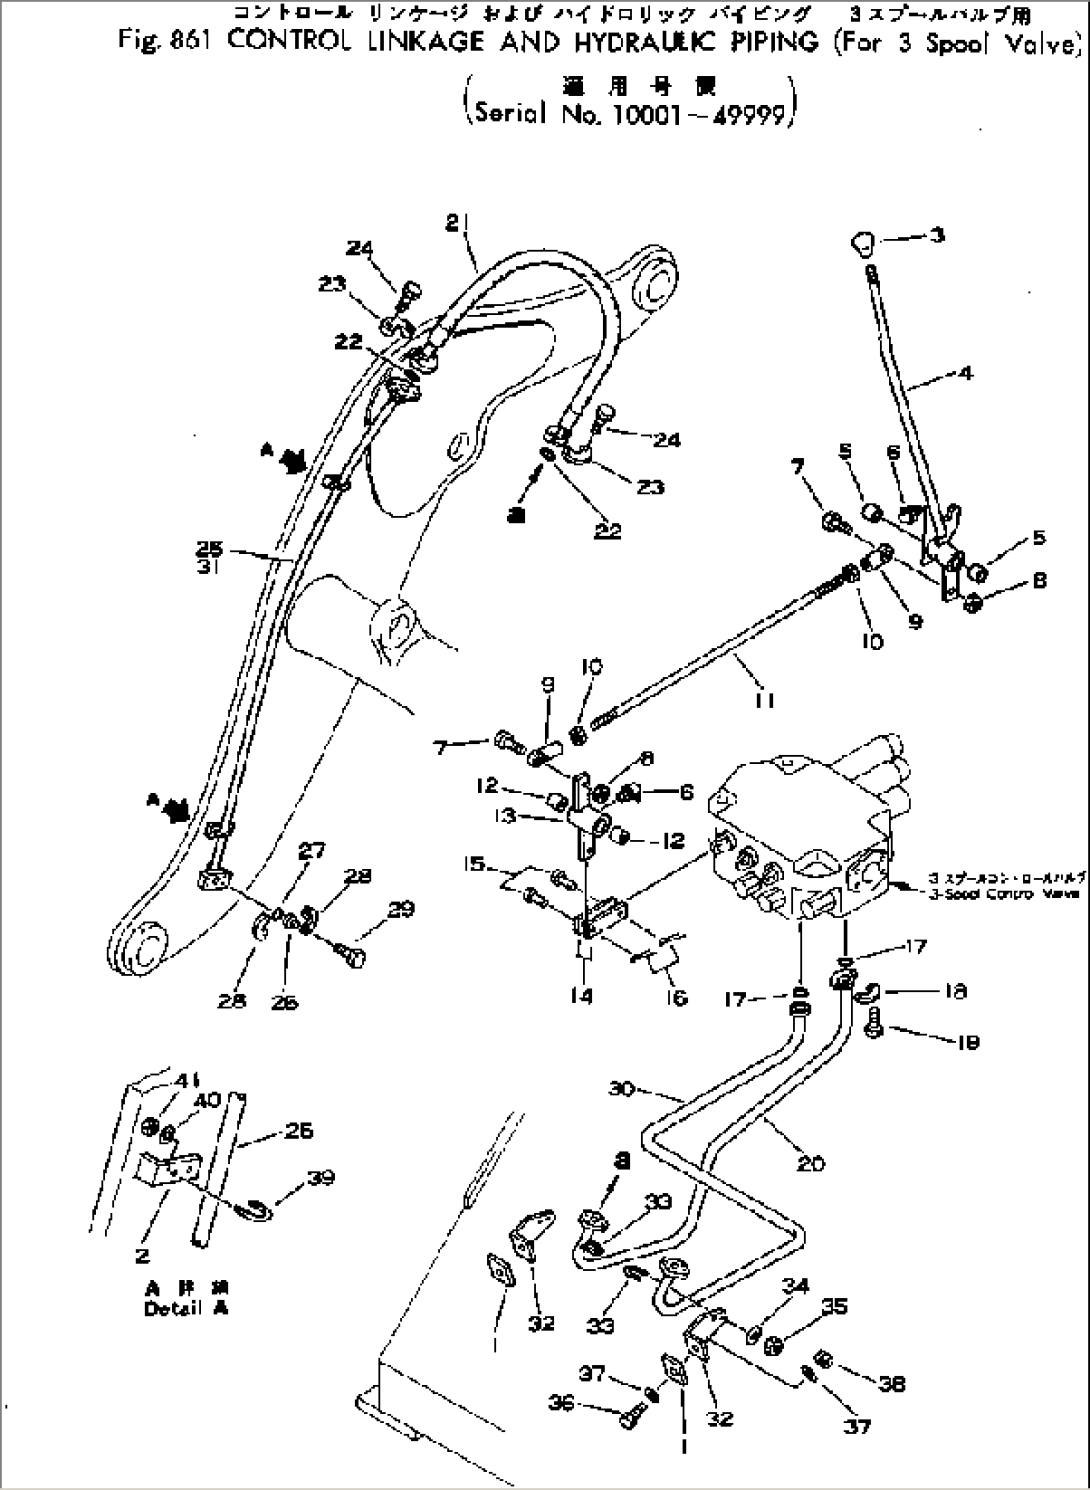 CONTROL LINKAGE AND PIPING (FOR 3-SPOOL VALVE)(#10001-49999)